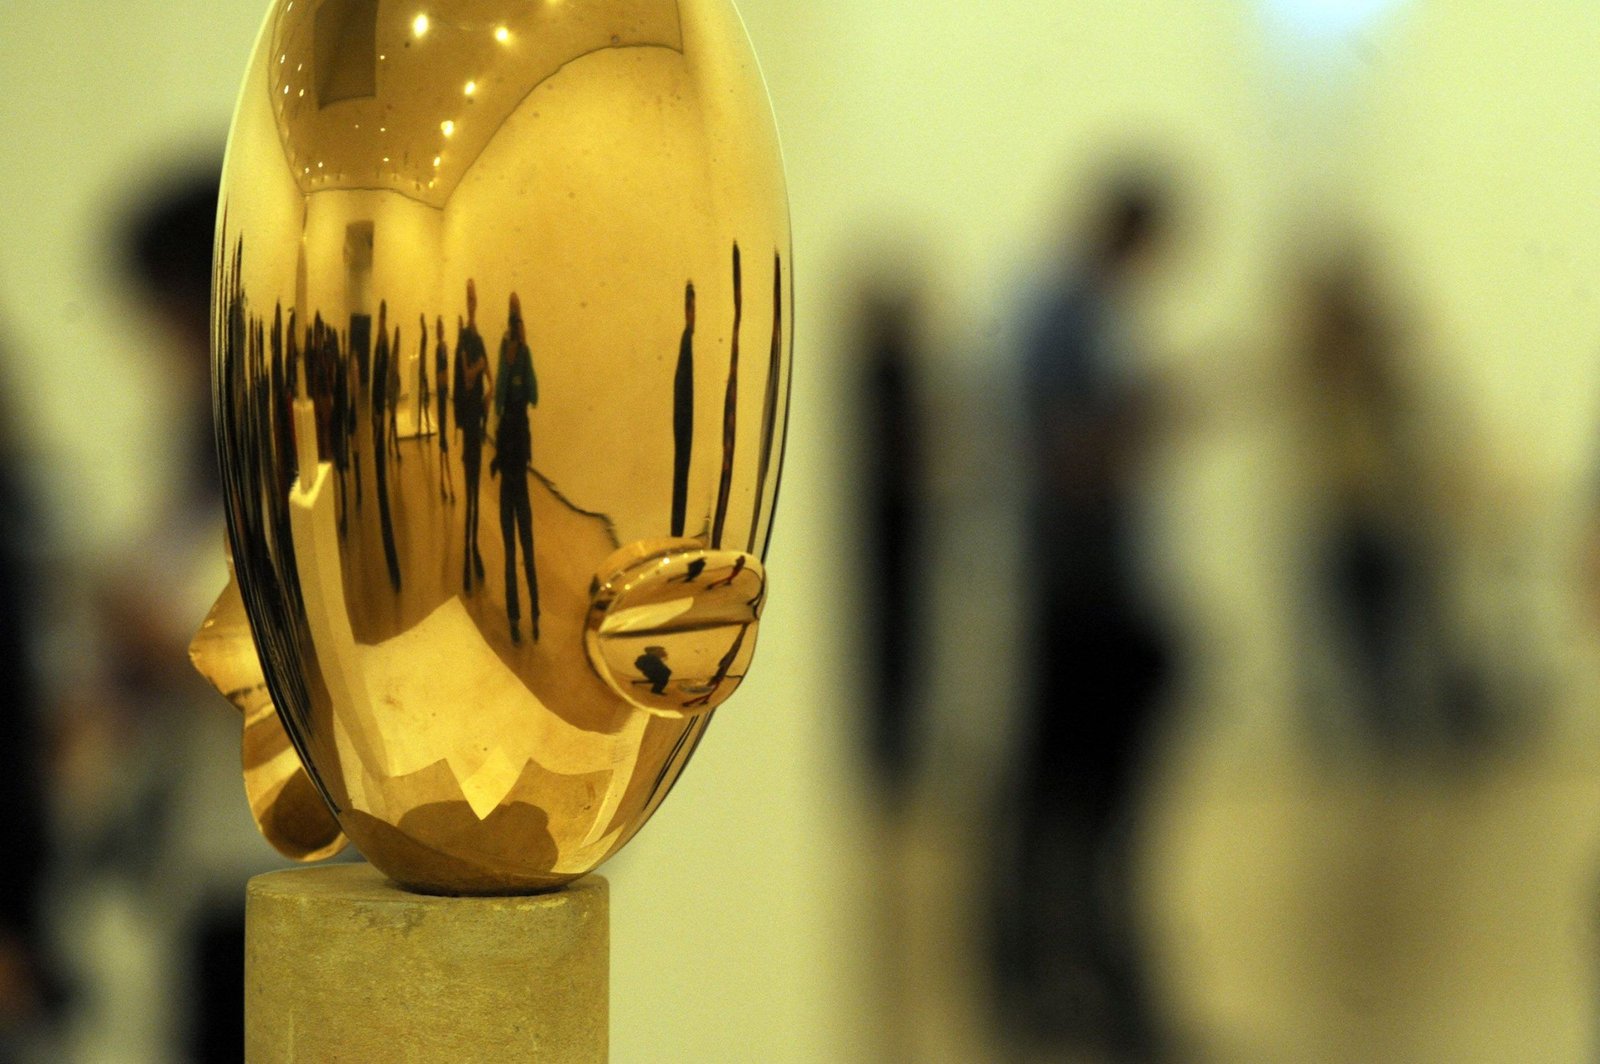 A Uncommon Exhibition for Revolutionary Sculptor Brancusi Opens in Paris This Month